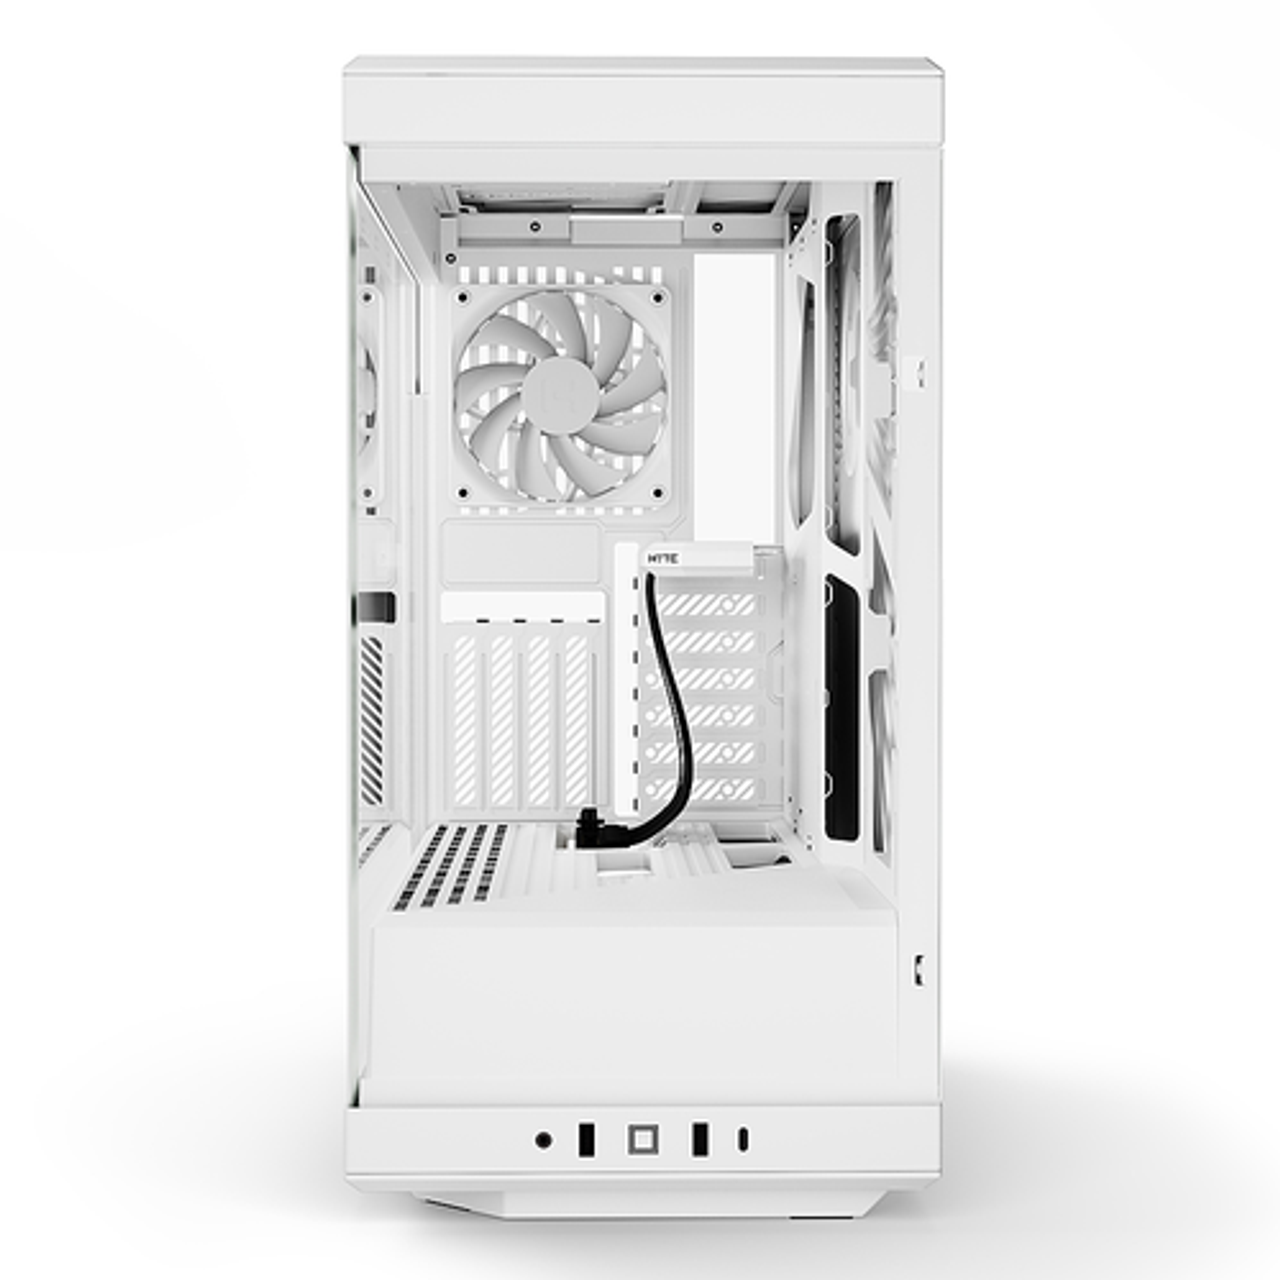 HYTE - Y40 ATX Mid-Tower Case with PCIe 4.0 Riser Cable - White/White